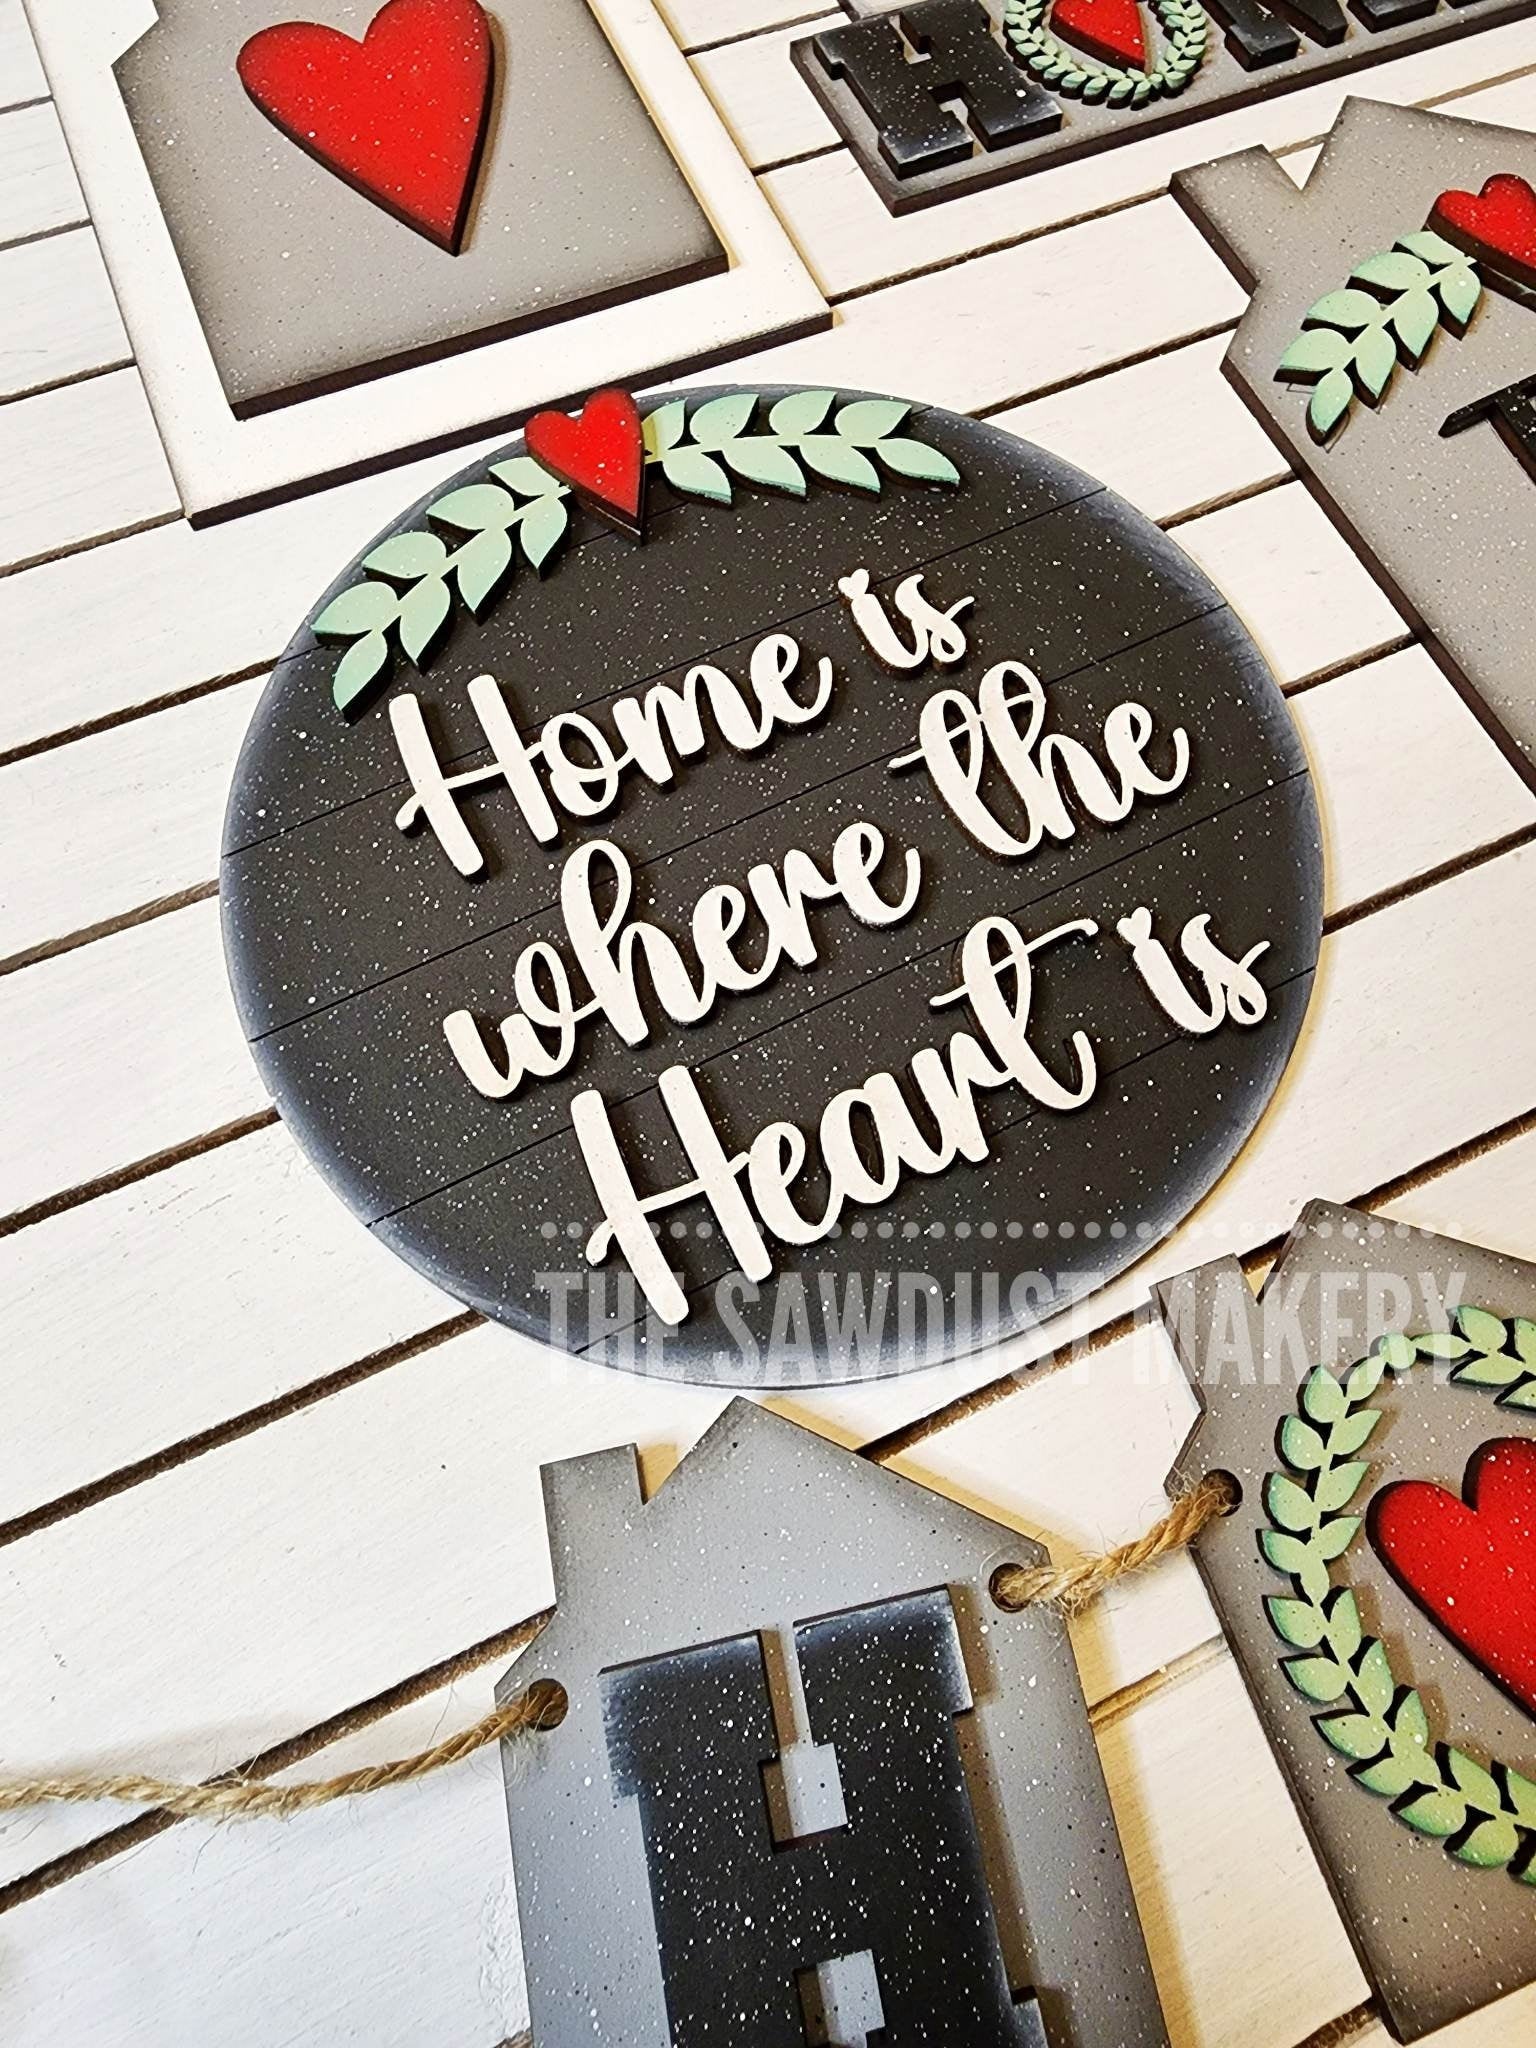 Home Is Where the Heart Is Cut File